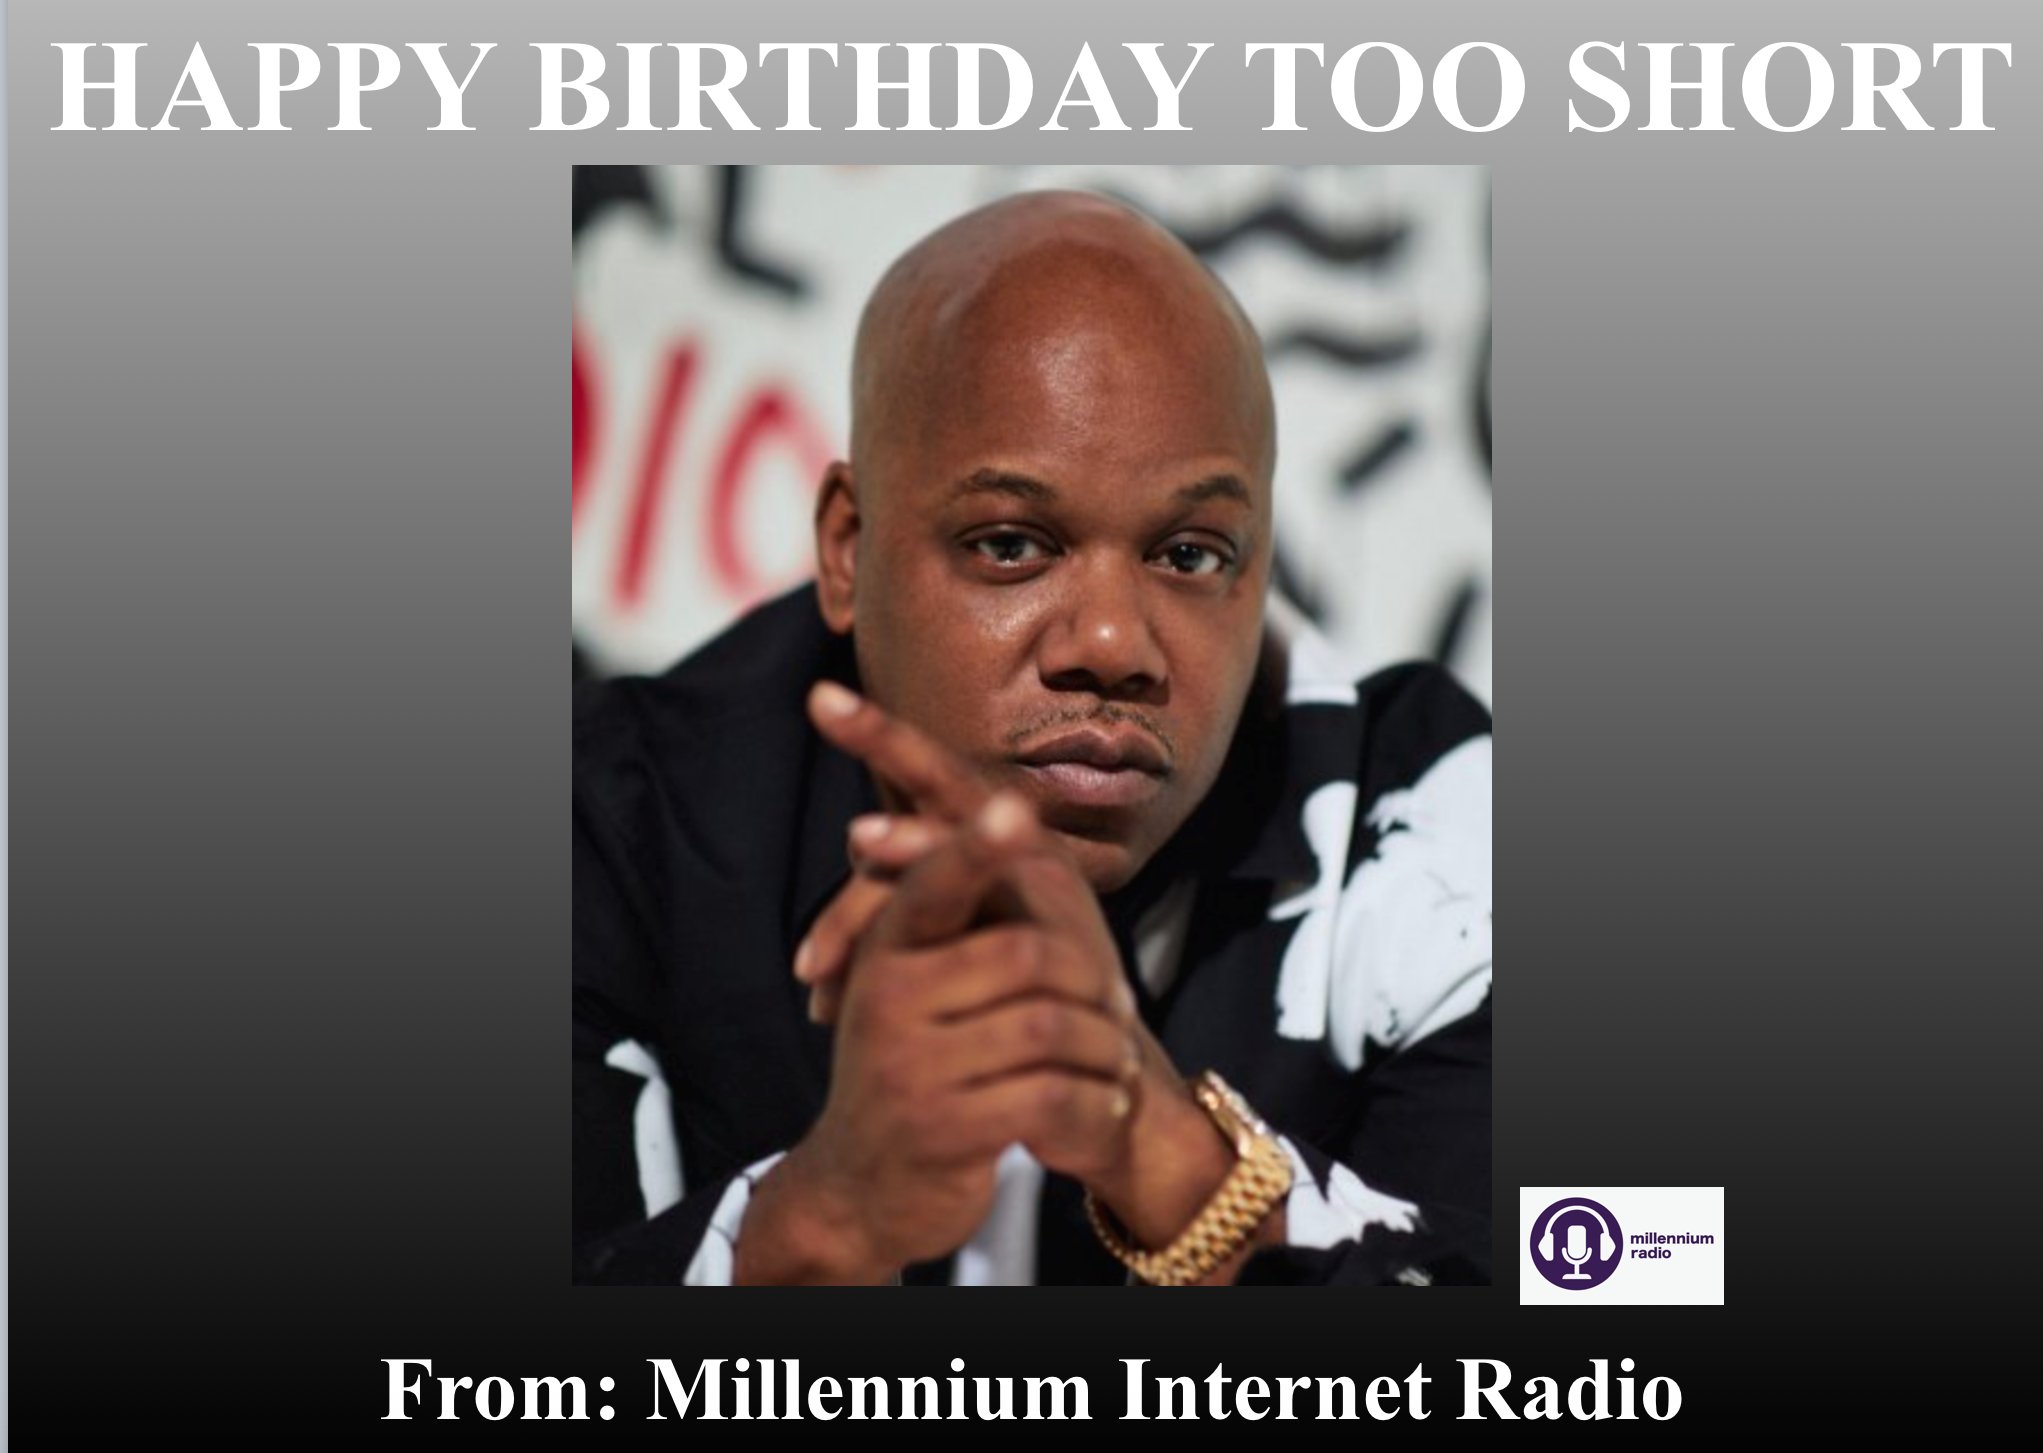 HAPPY BIRTHDAY TO RAPPER AND RECORD PRODUCER TOO SHORT!! 